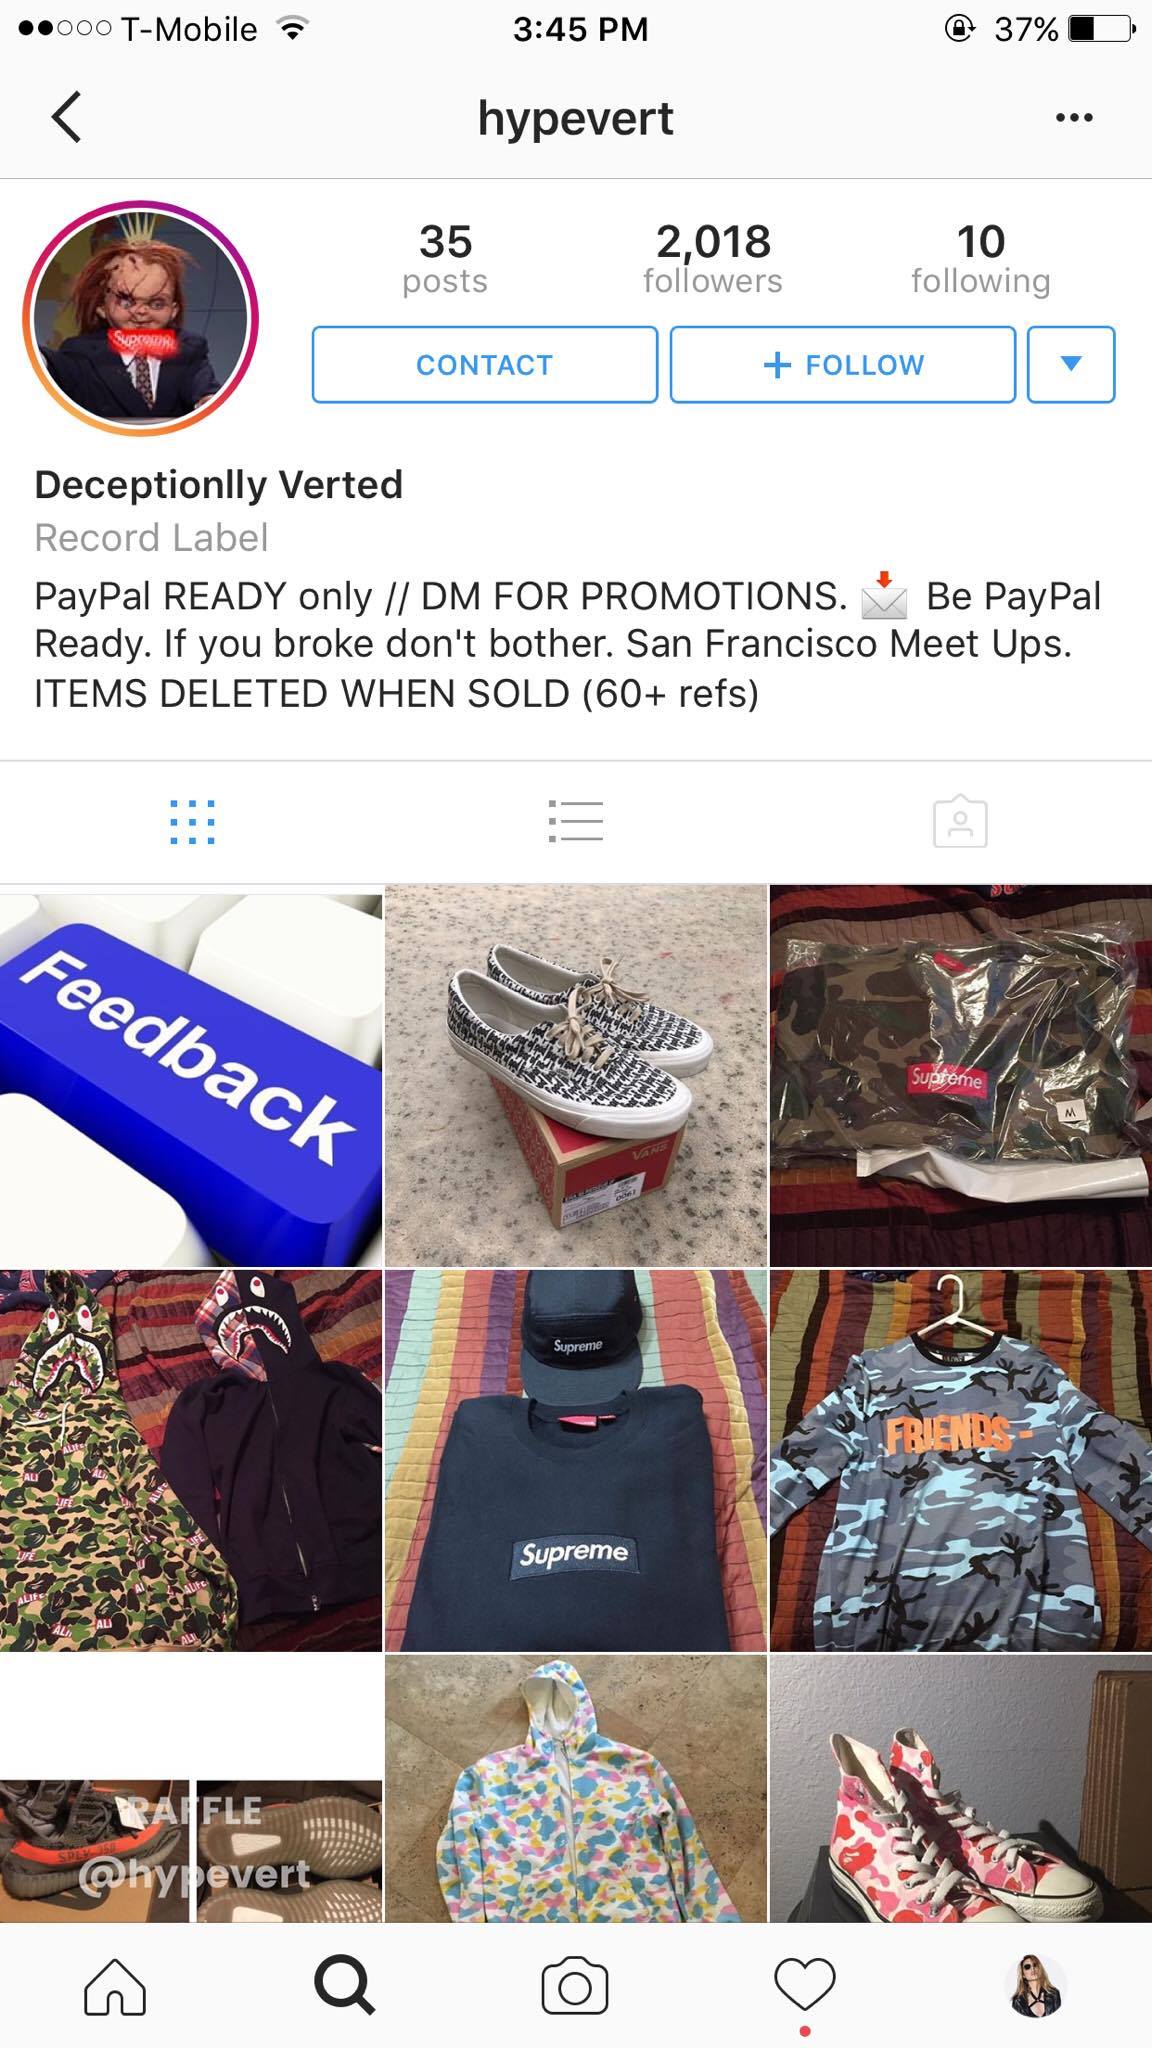 My friend tried to buy the multicolor BAPE hoodie on the bottom row. Once payment went through, they blocked his account and reposted the hoodie for sale. Scummy.